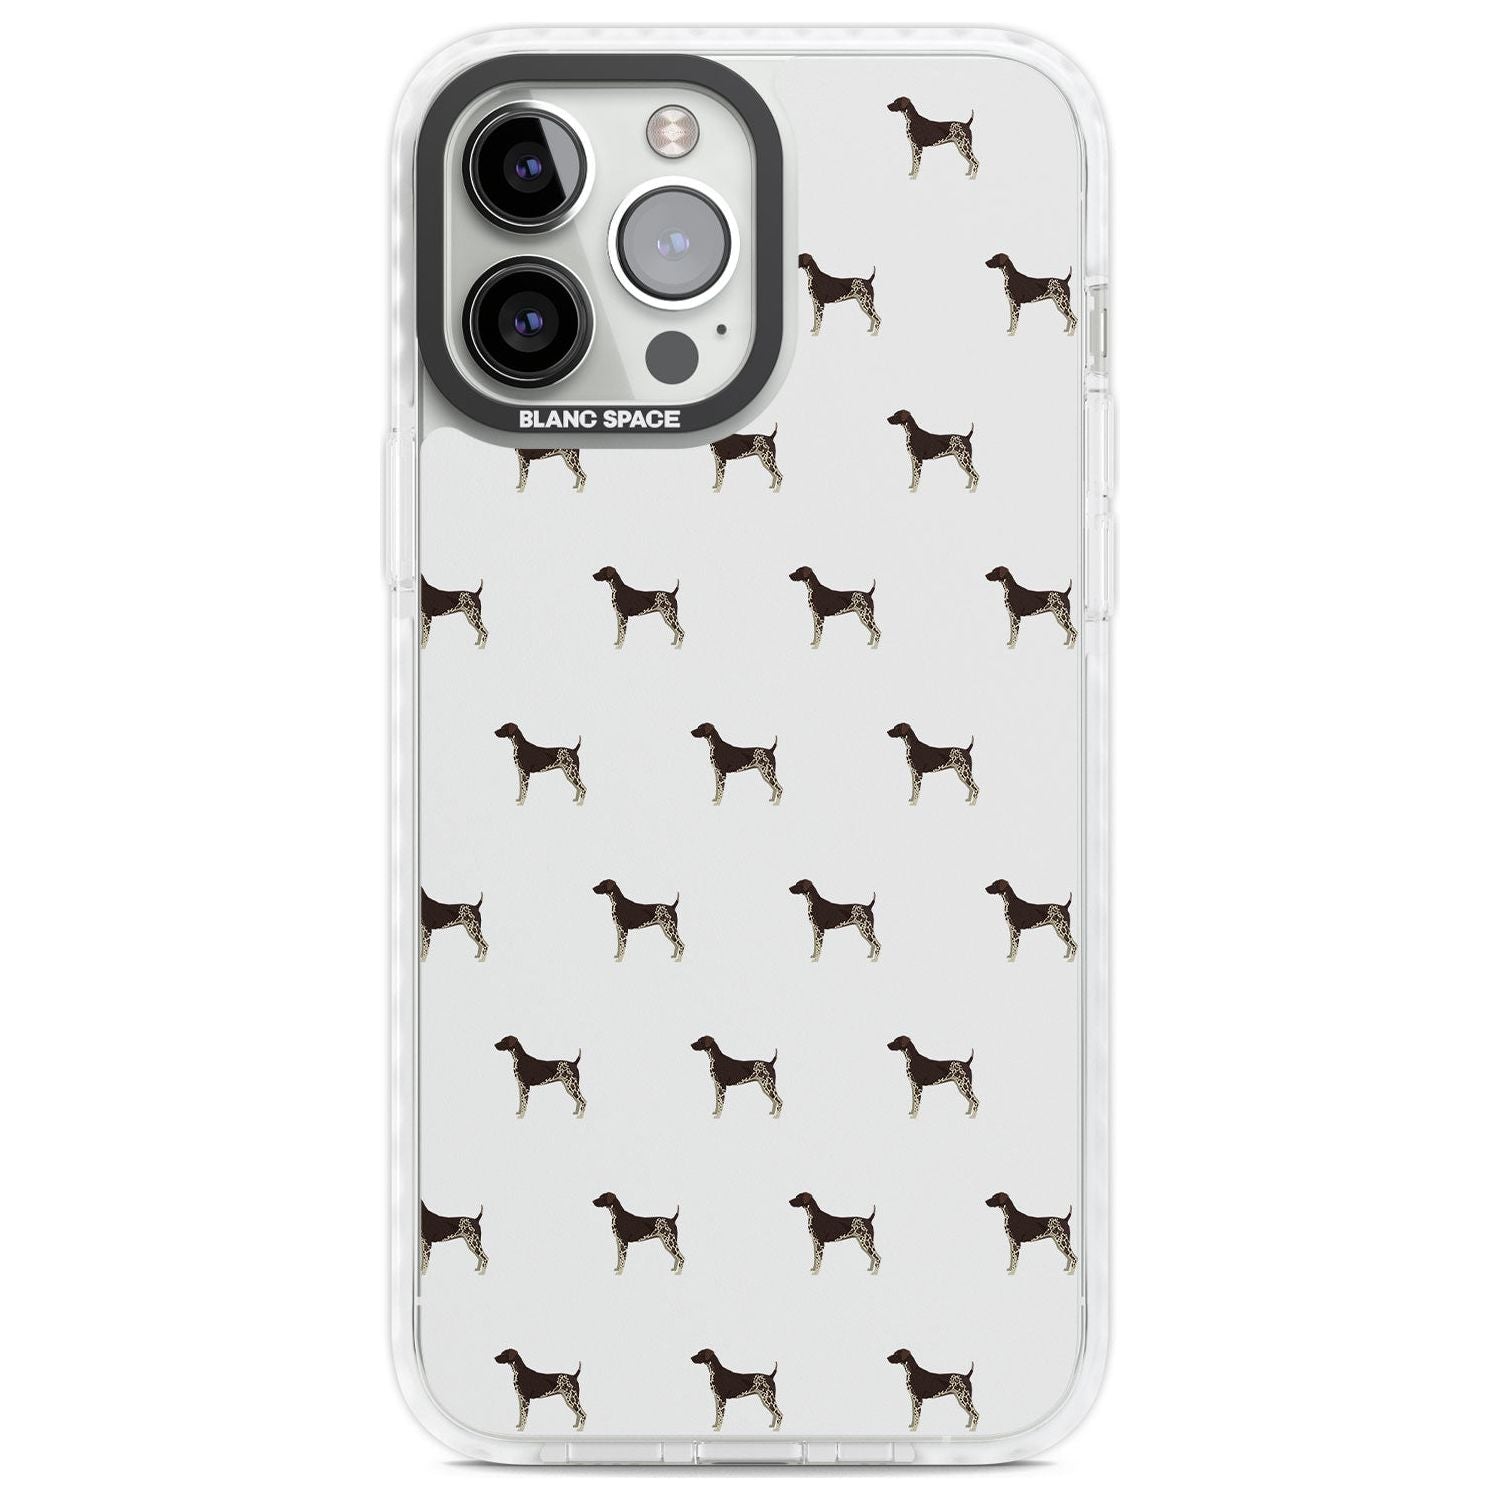 German Shorthaired Pointer Dog Pattern Phone Case iPhone 13 Pro Max / Impact Case,iPhone 14 Pro Max / Impact Case Blanc Space